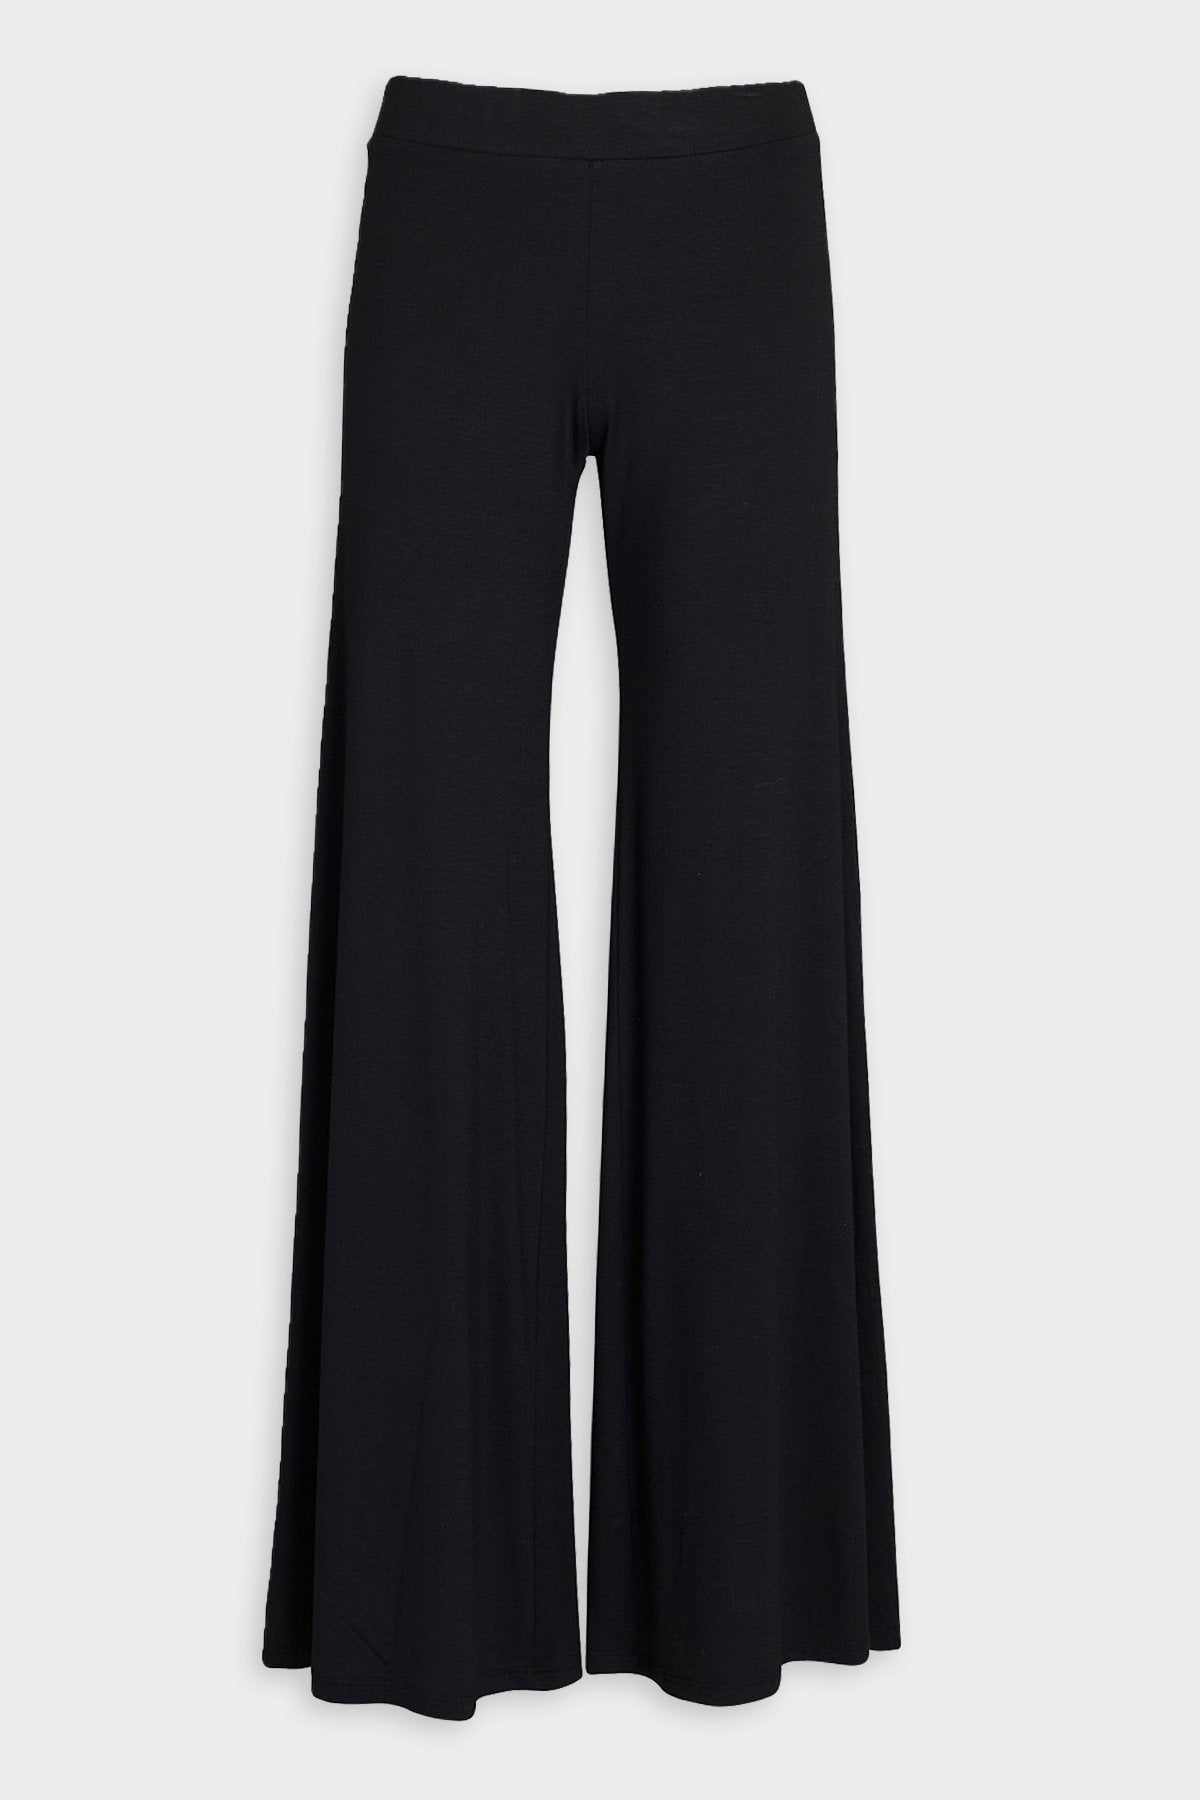 Luxe Knit Wide Leg Pant in Black - shop-olivia.com